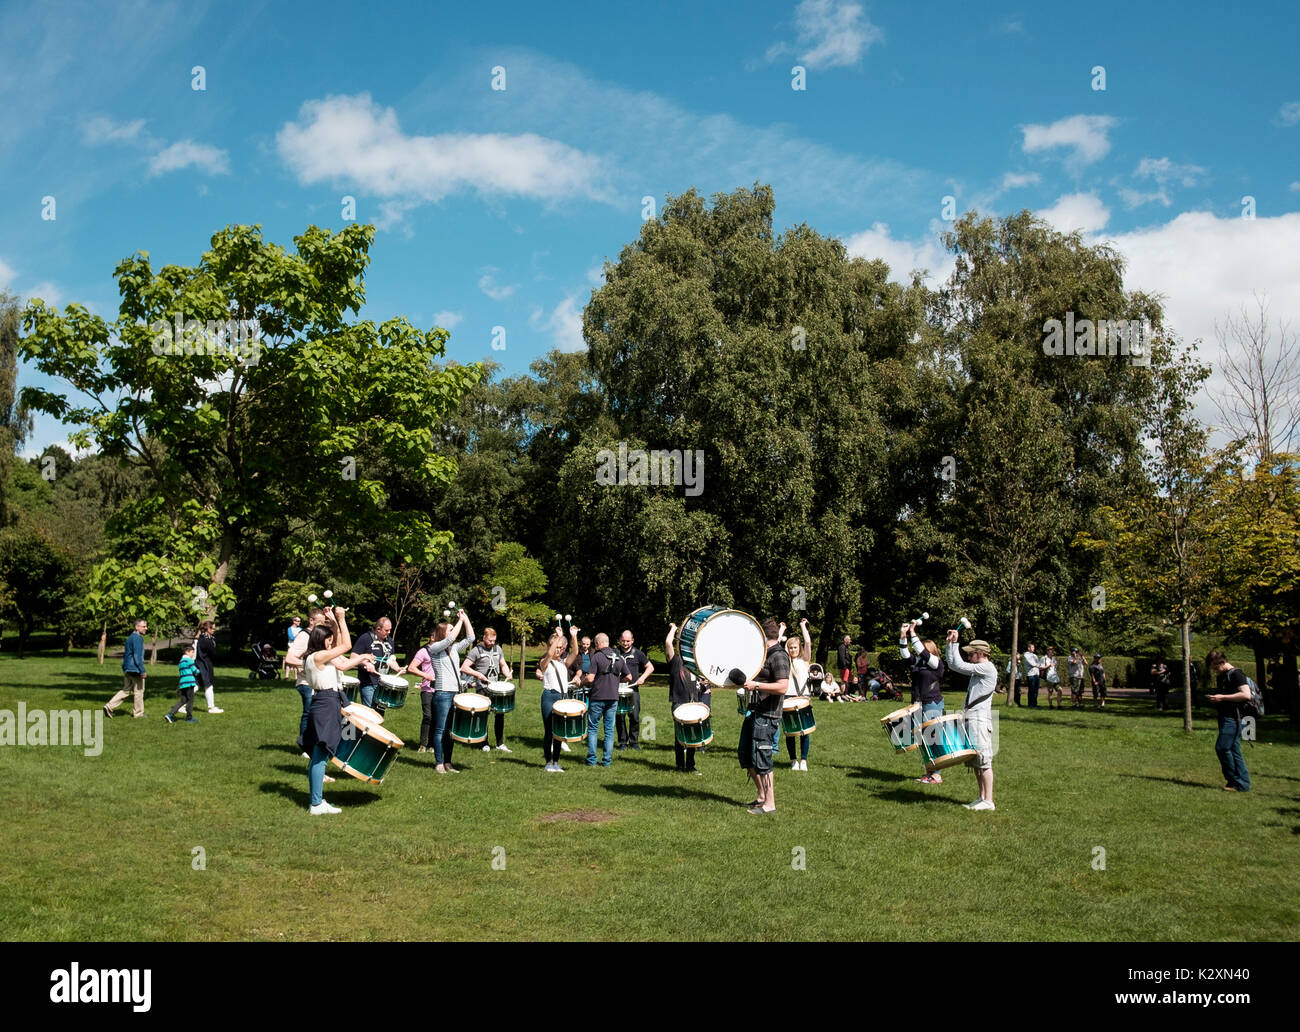 Drummers, part of a pipe band, practising  out of uniform in Kelvingrove Park Glasgow ahead of the World Pipe Band Championship 2017 held in the city  Stock Photo